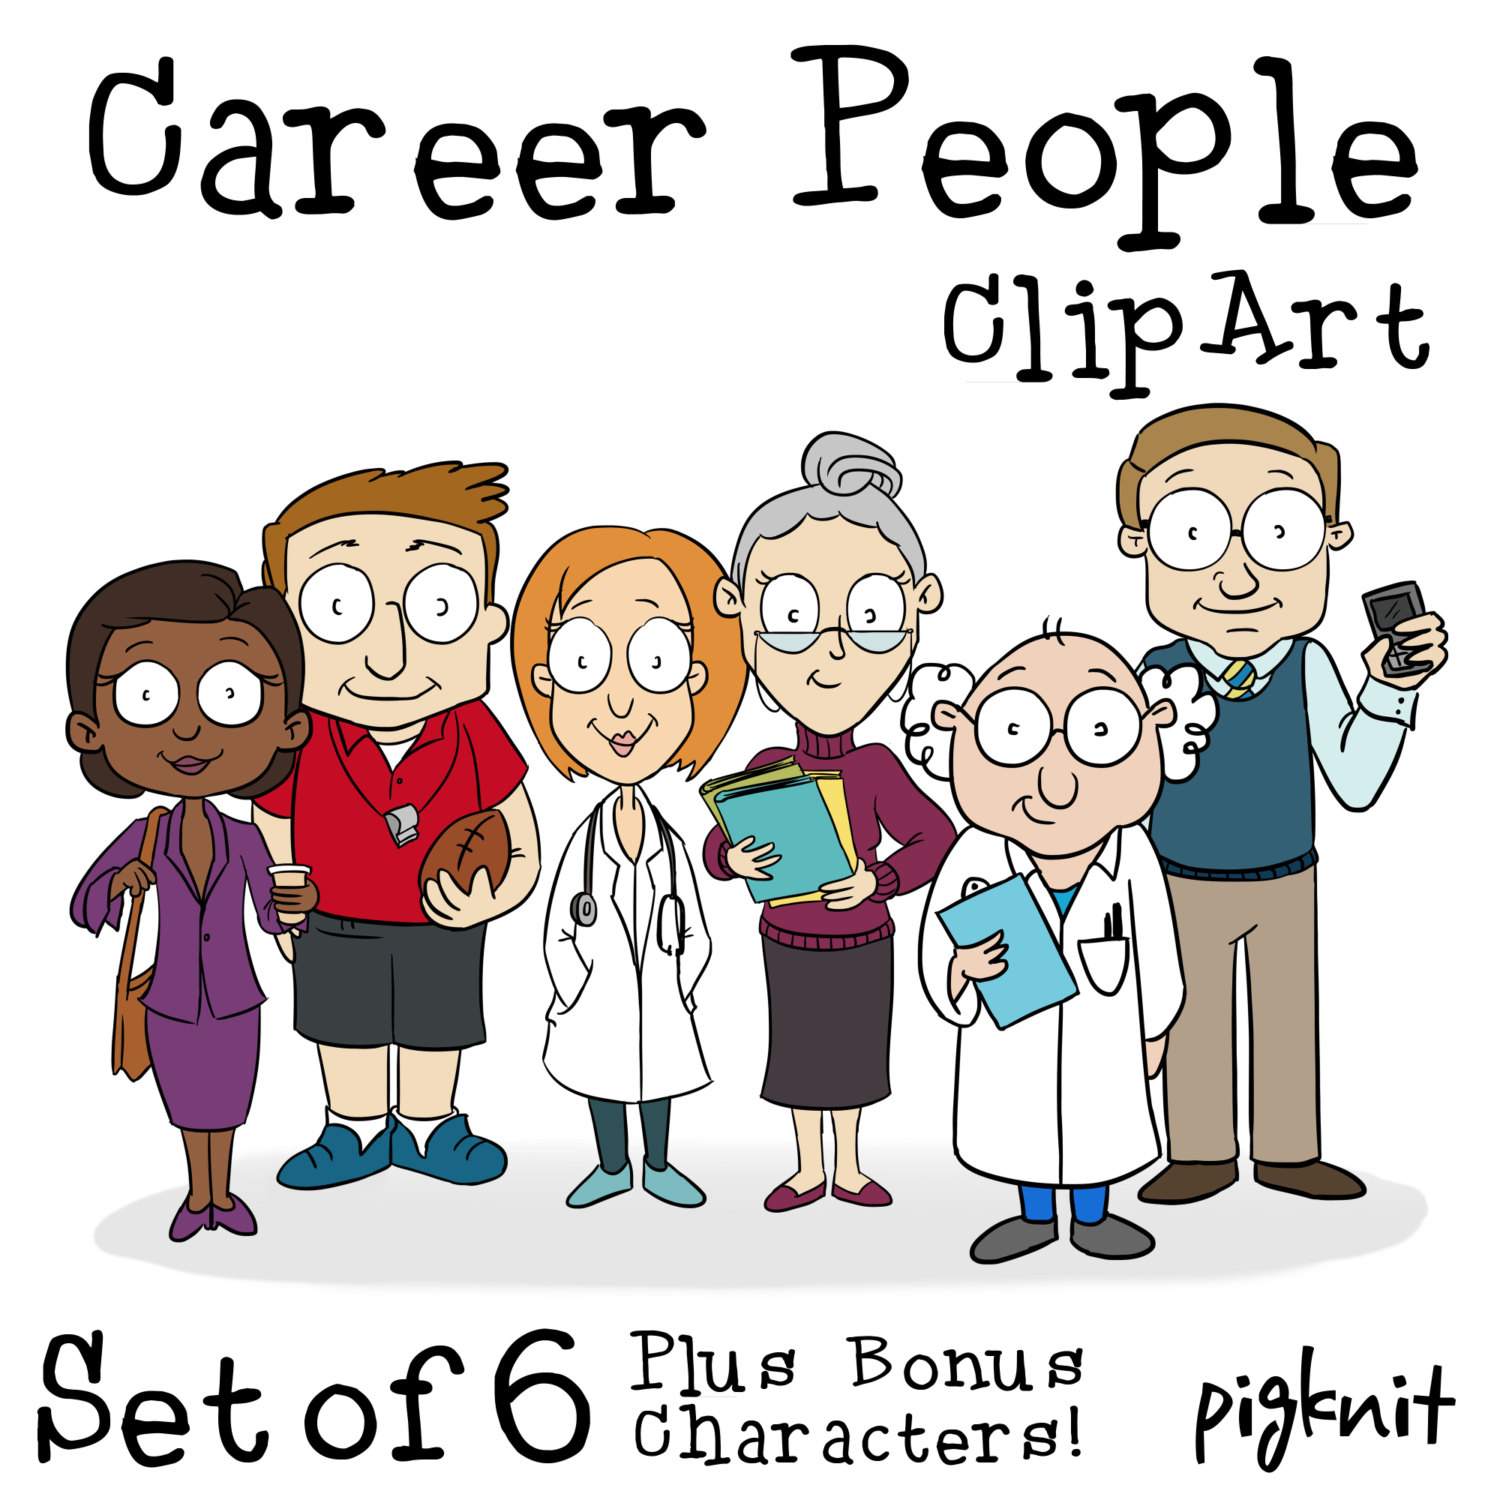 Career People Clip Art Cartoon Character Clip Art By Pigknit